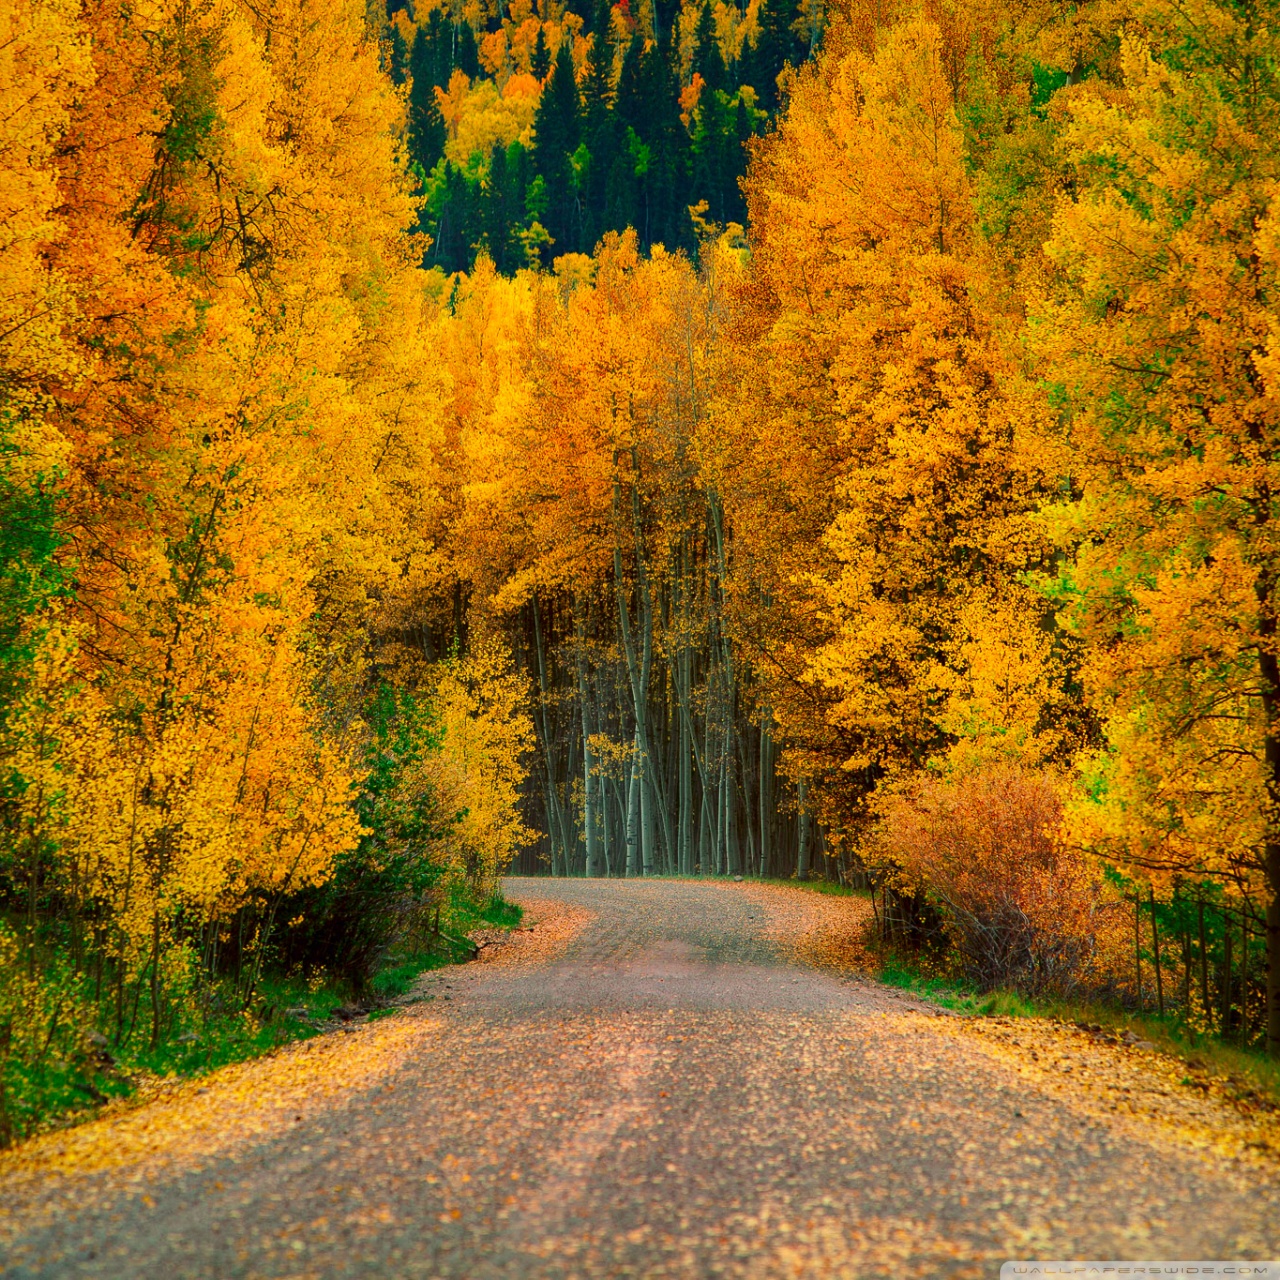 Yellow Leaves Growing On Aspen Trees Surrounded In Yellow Autumn Leaves  Background Aspen Tree Pictures Background Image And Wallpaper for Free  Download